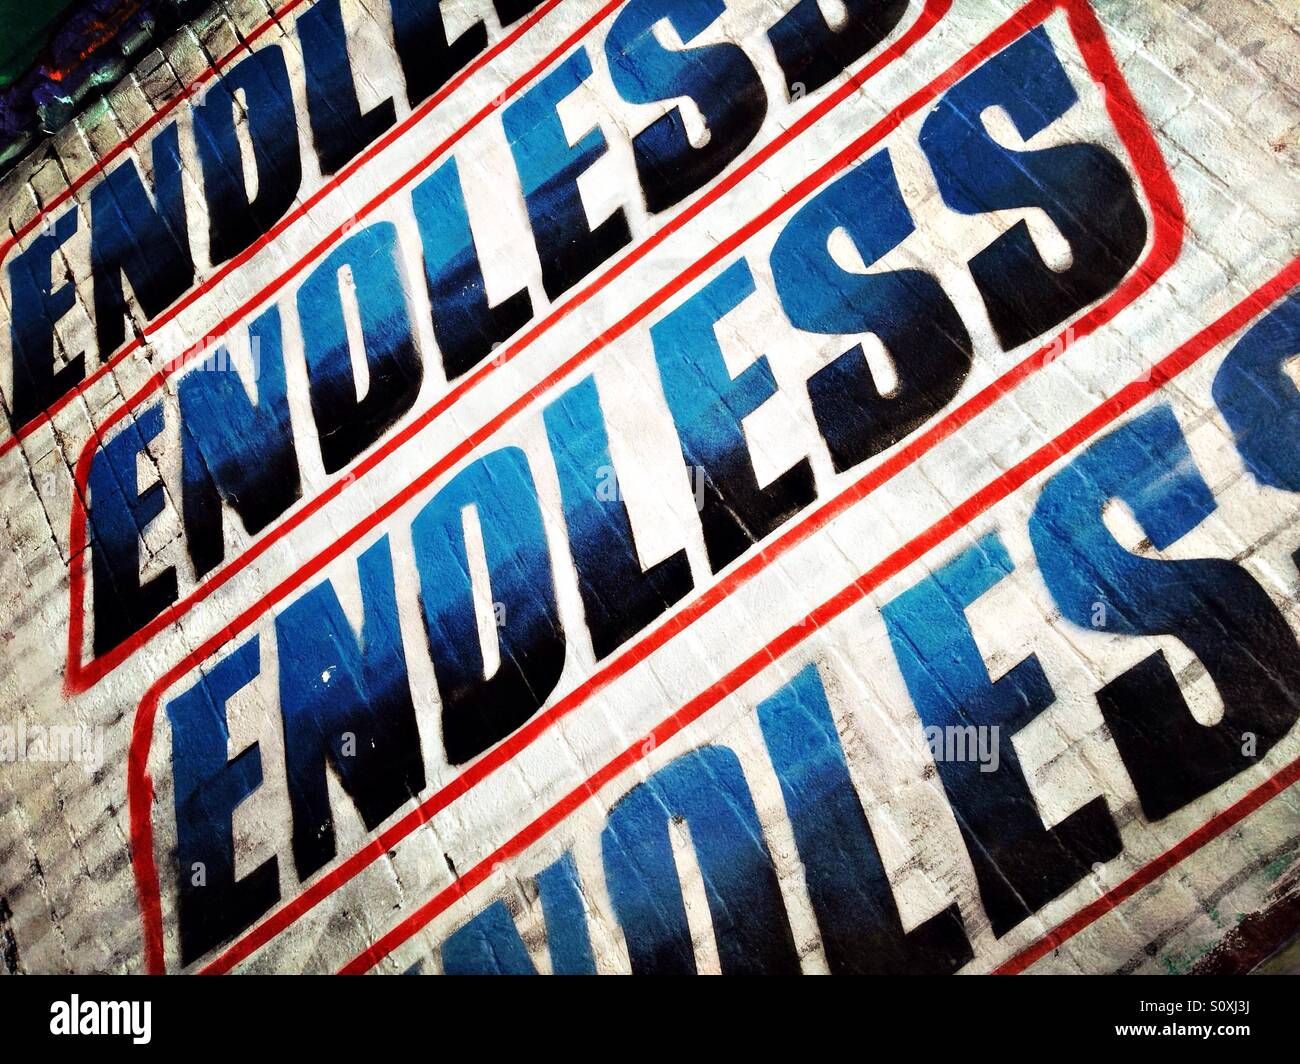 Graffiti by endless mimicking snickers Design on a wall in Brick Lane, Shoreditch, London, England Stock Photo